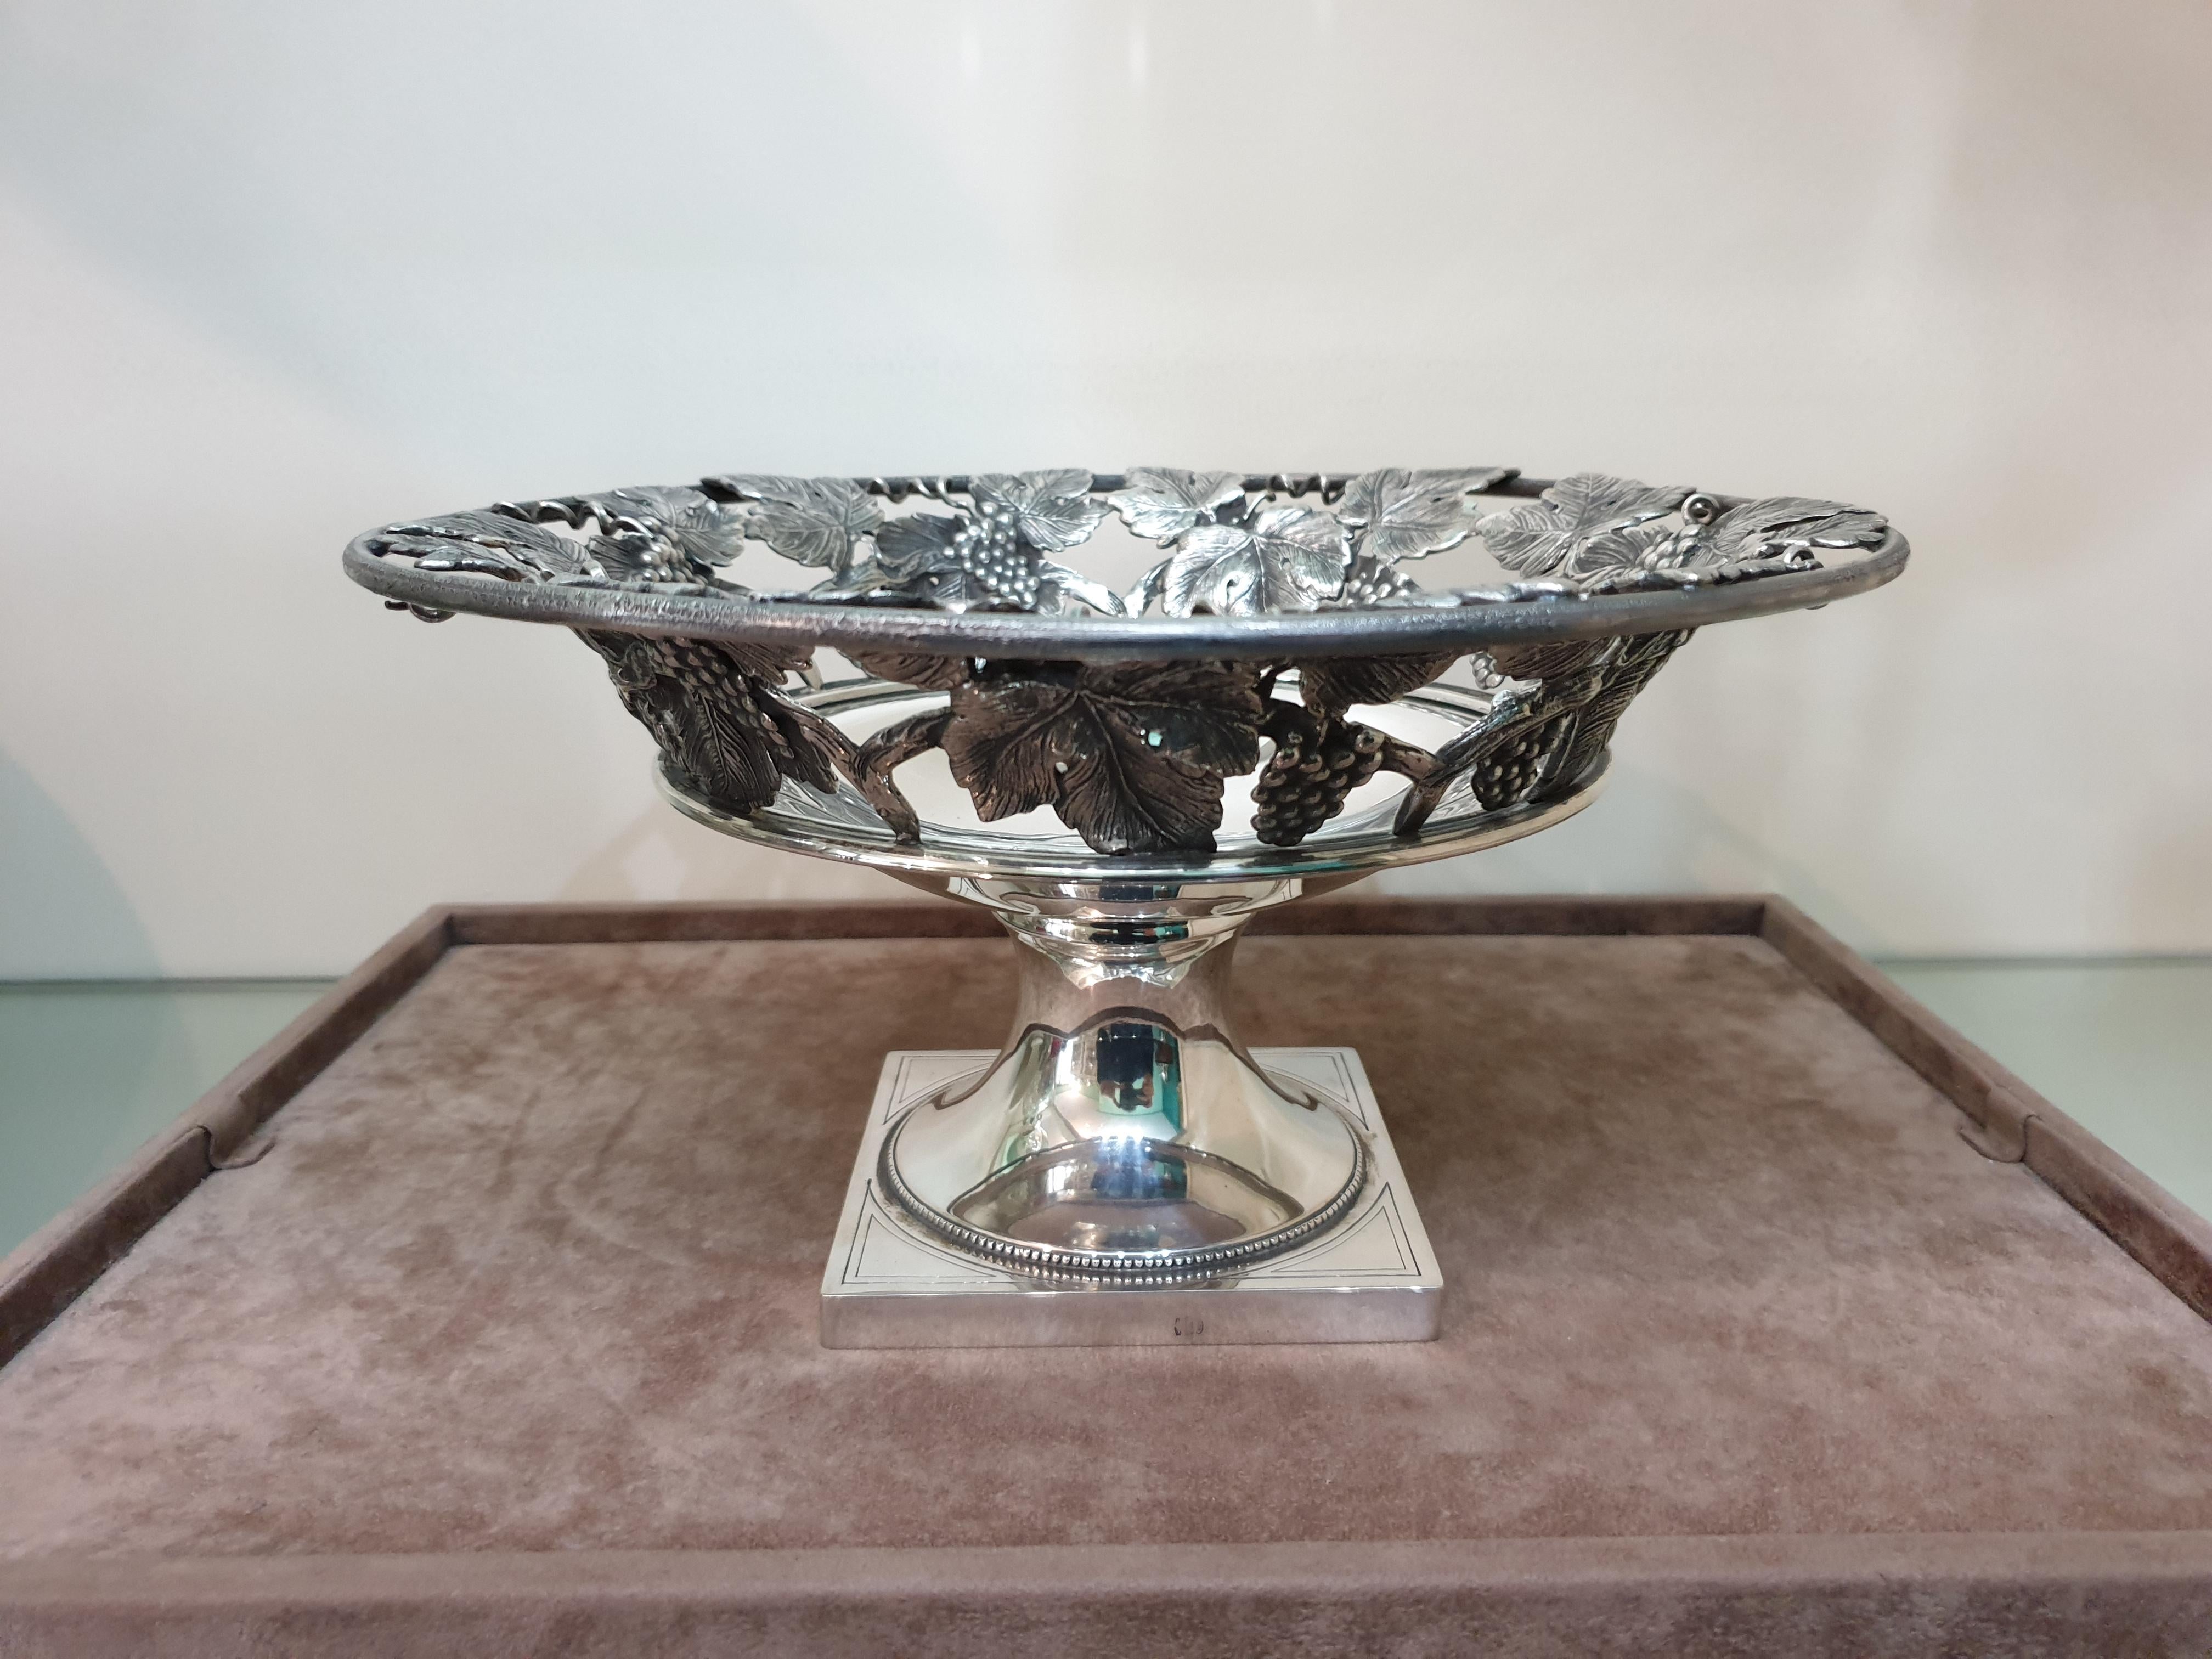 Silver fruit stand realized in Milan, Italy, between 1934 and 1944.
Handcrafted and engraved. Decorated with grape fruits and vines on the top part.
Dimensions: Diameter 27 cm, height 14 cm, weight 1270 gr.